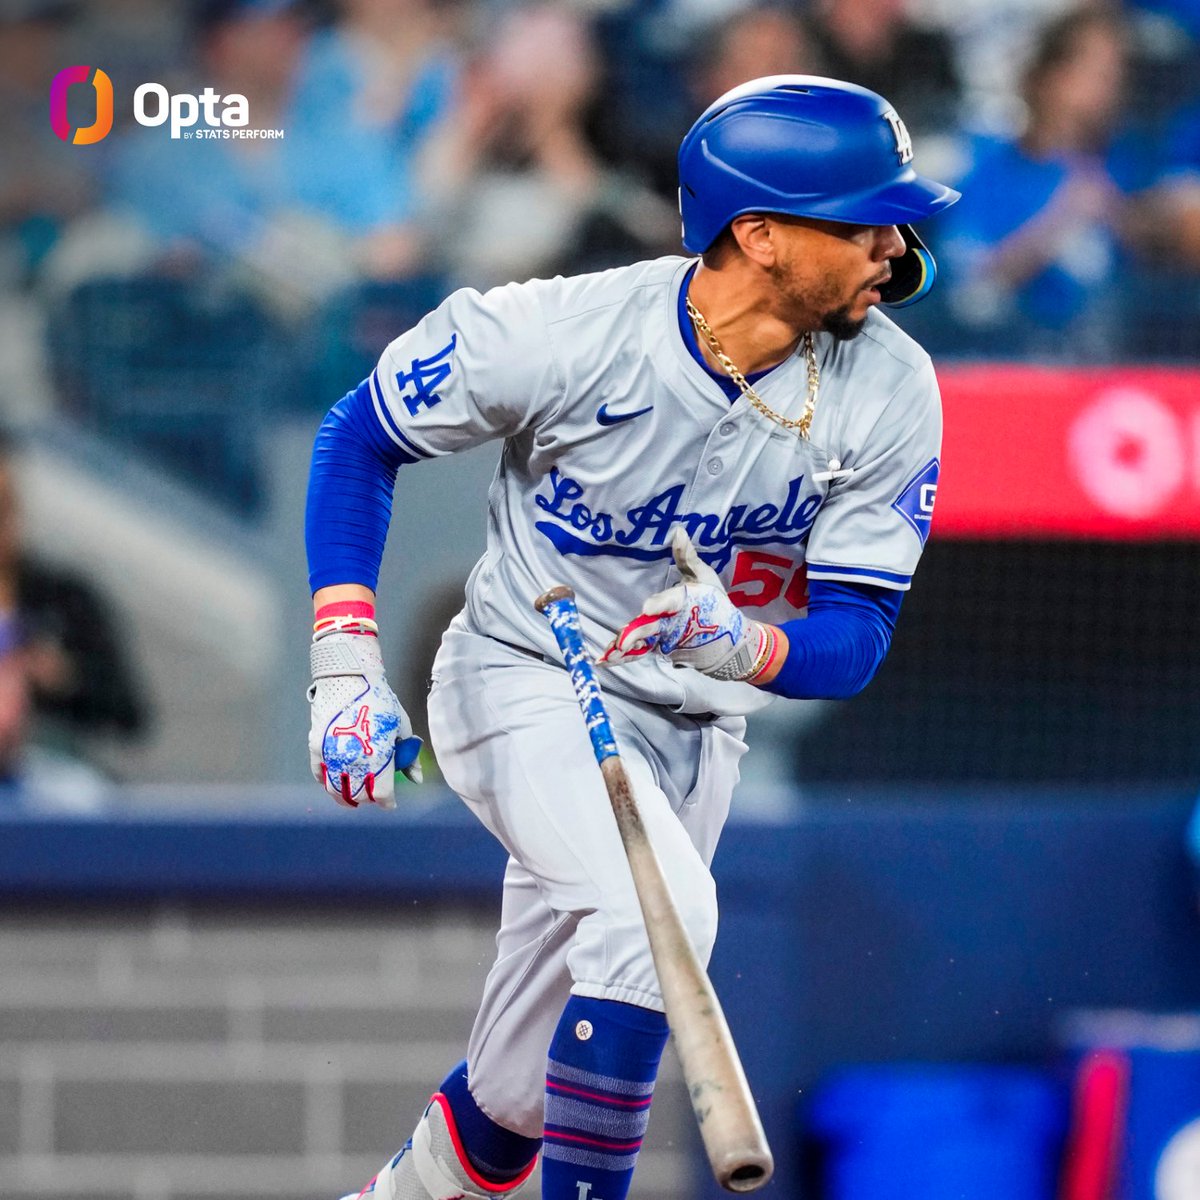 The @Dodgers' Mookie Betts entered today leading MLB in hits, runs and walks. The only player to finish a season leading MLB in all three categories was the White Stockings' Ross Barnes in 1876.